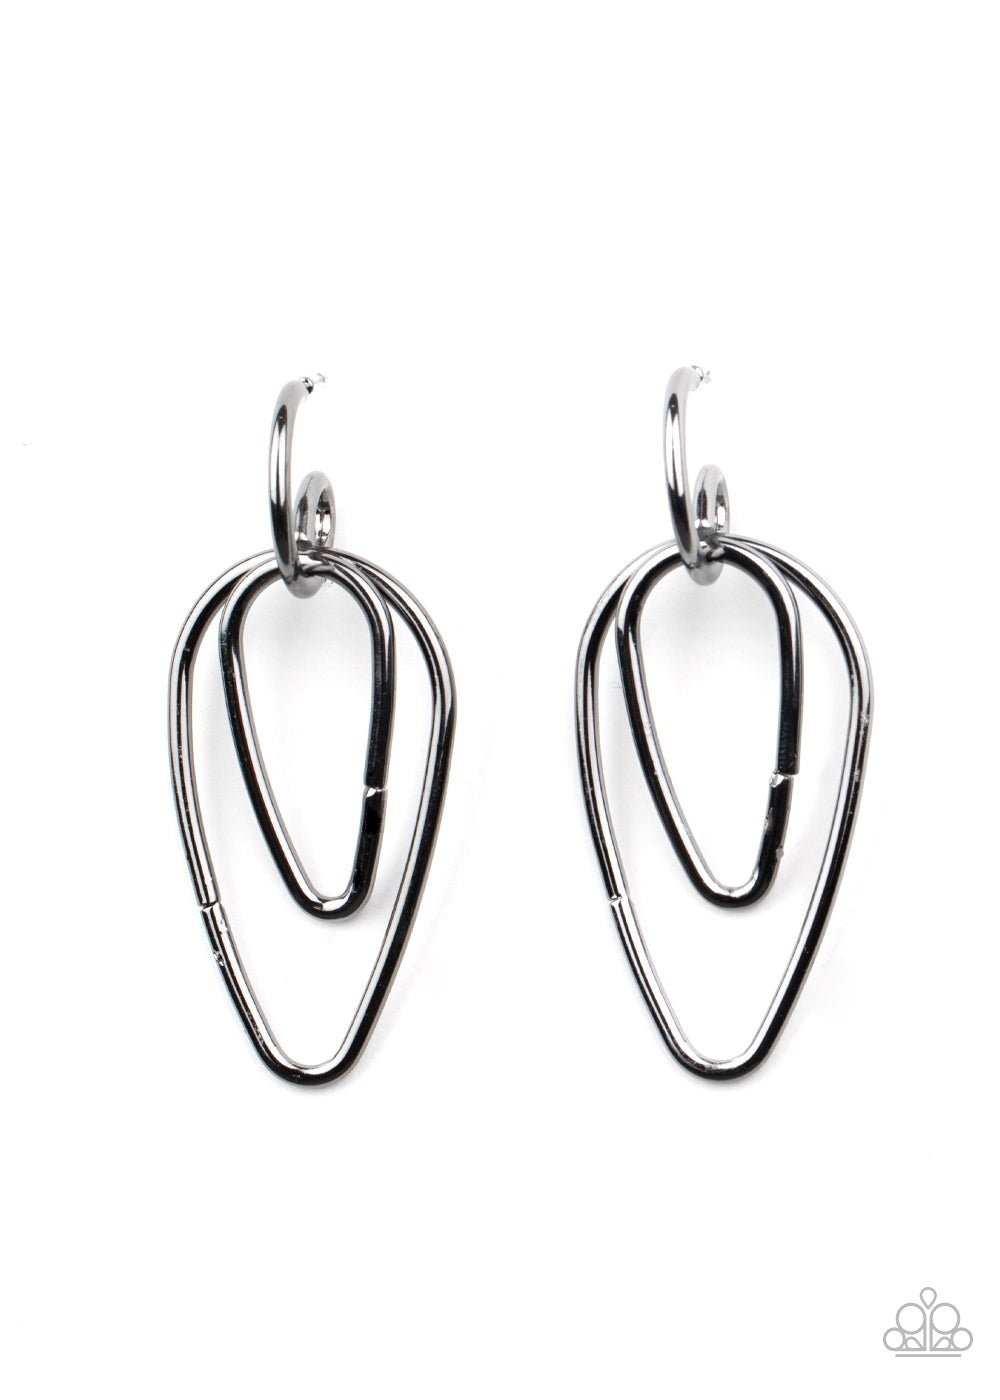 Droppin Drama - Black / Gunmetal Earrings - Paparazzi Accessories - A squiggly gunmetal bar curls around the tops of two teardrop gunmetal frames, creating an abstract hoop. Earring attaches to a standard post fitting. Hoop measures approximately 3/4" in diameter. Sold as one pair of hoop earrings.